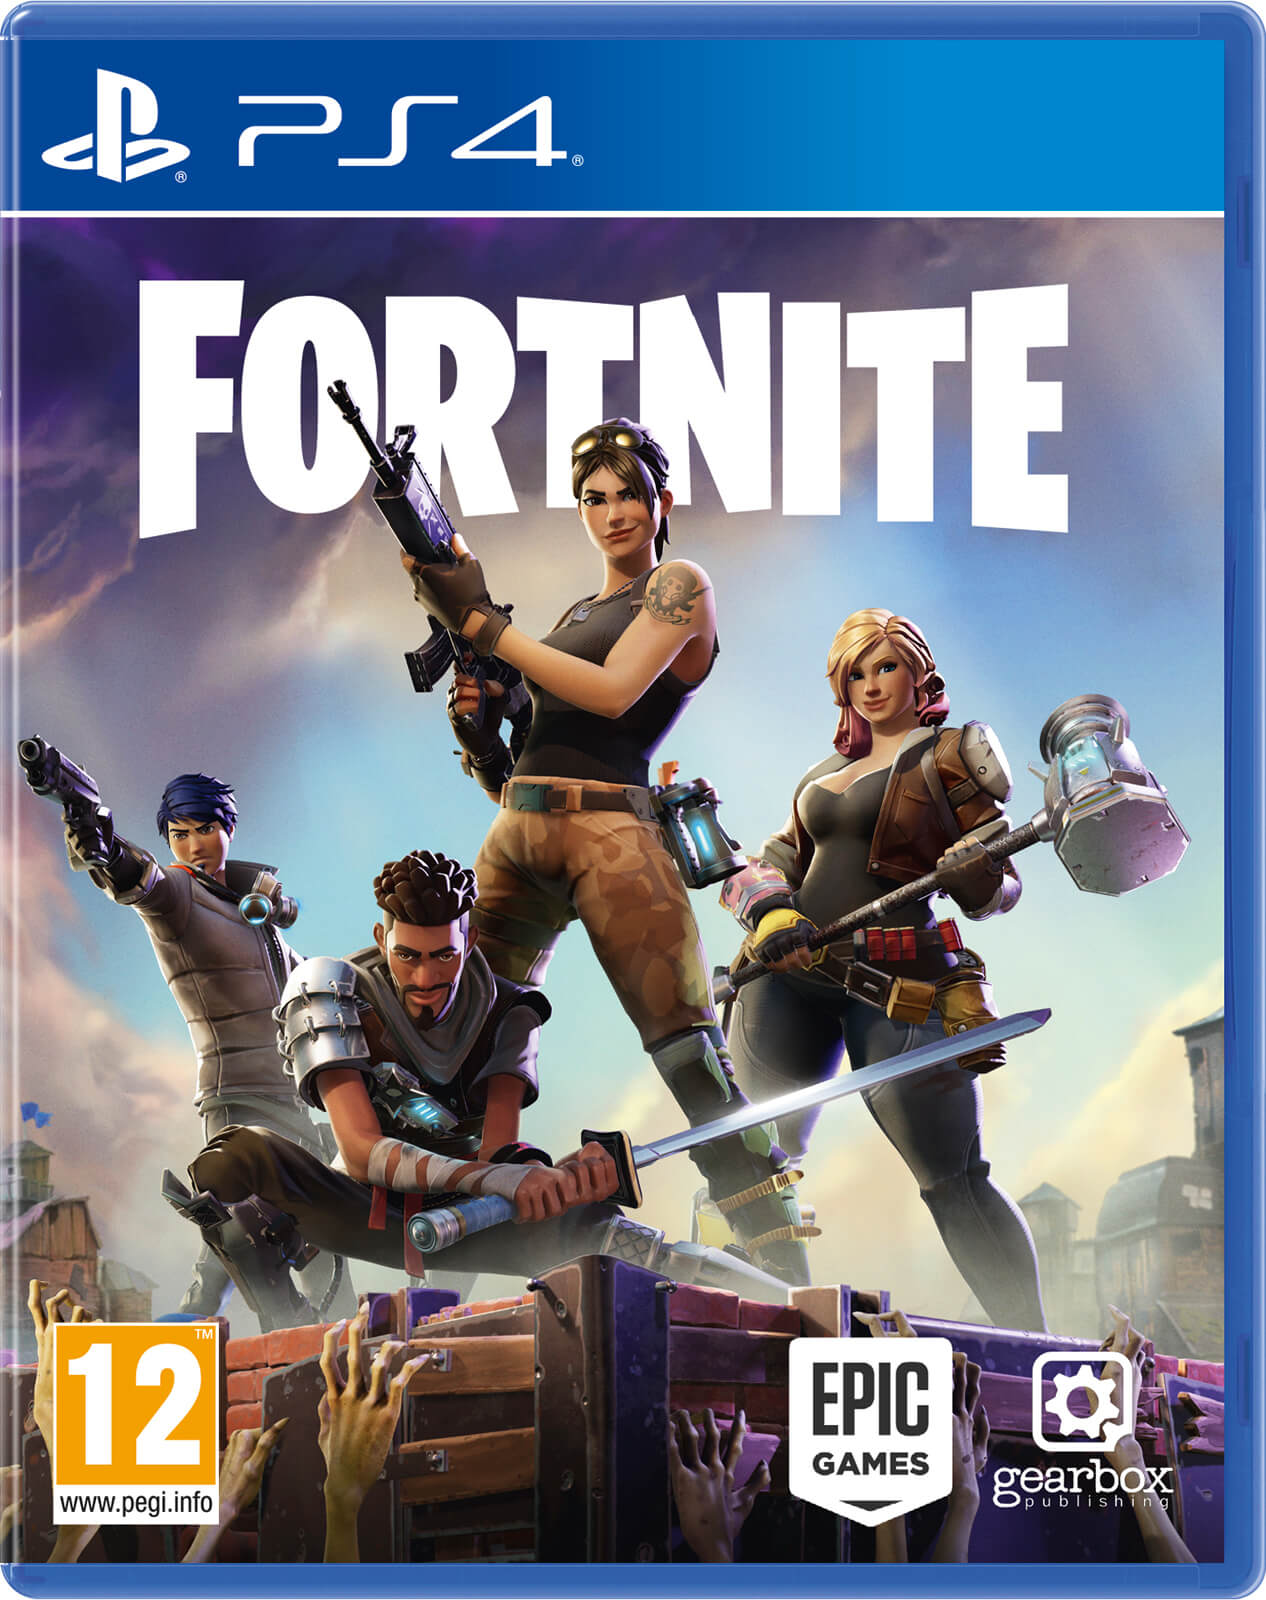 ps4 count with psn rare fortnite and apex profile with other games